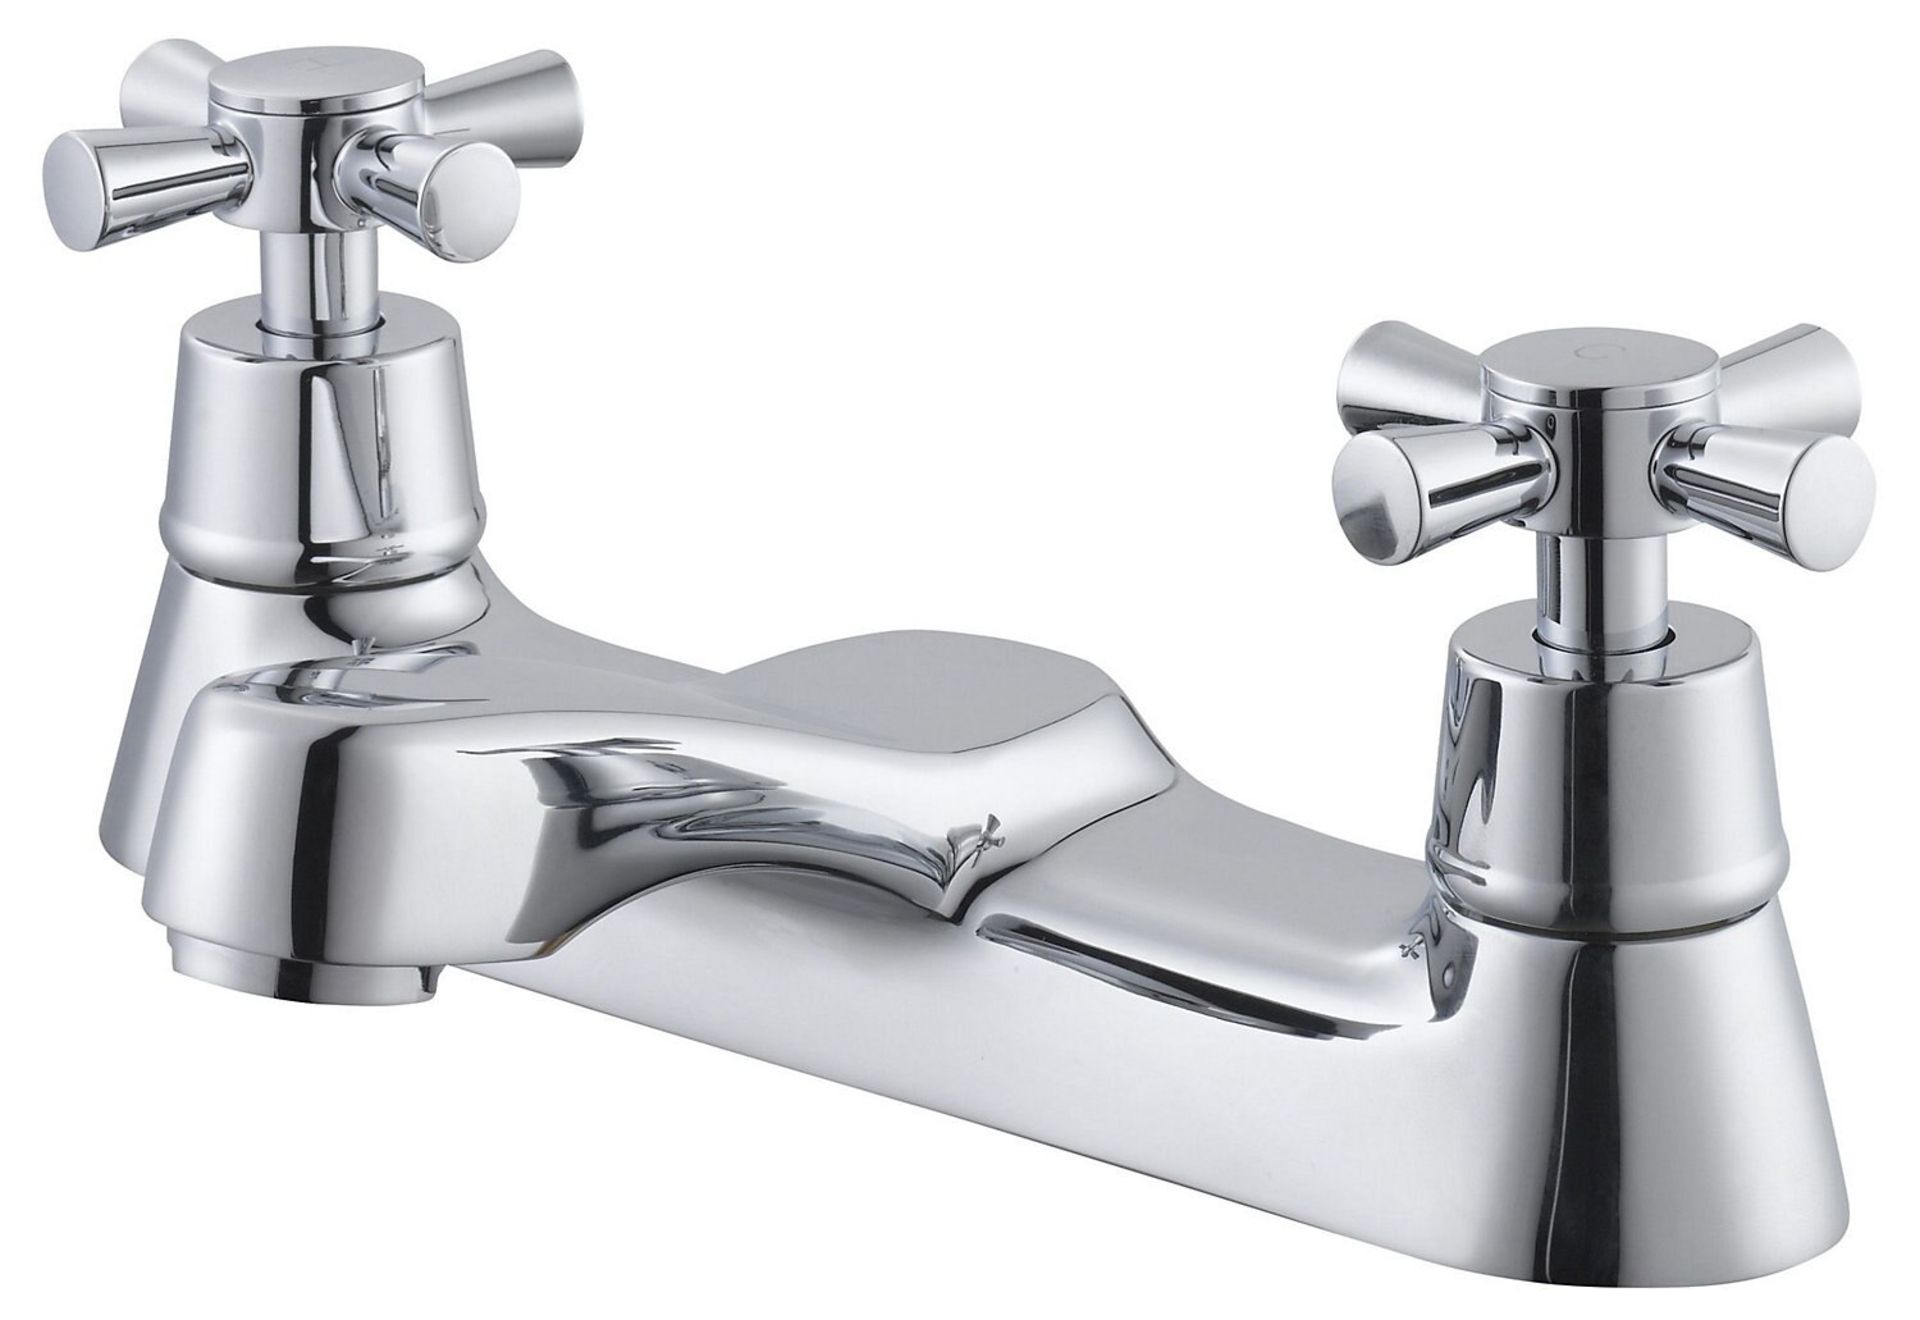 (SH1019) Crystal Chrome finish Bath mixer tap. This traditional crosshead design bath mixer tap... - Image 2 of 2